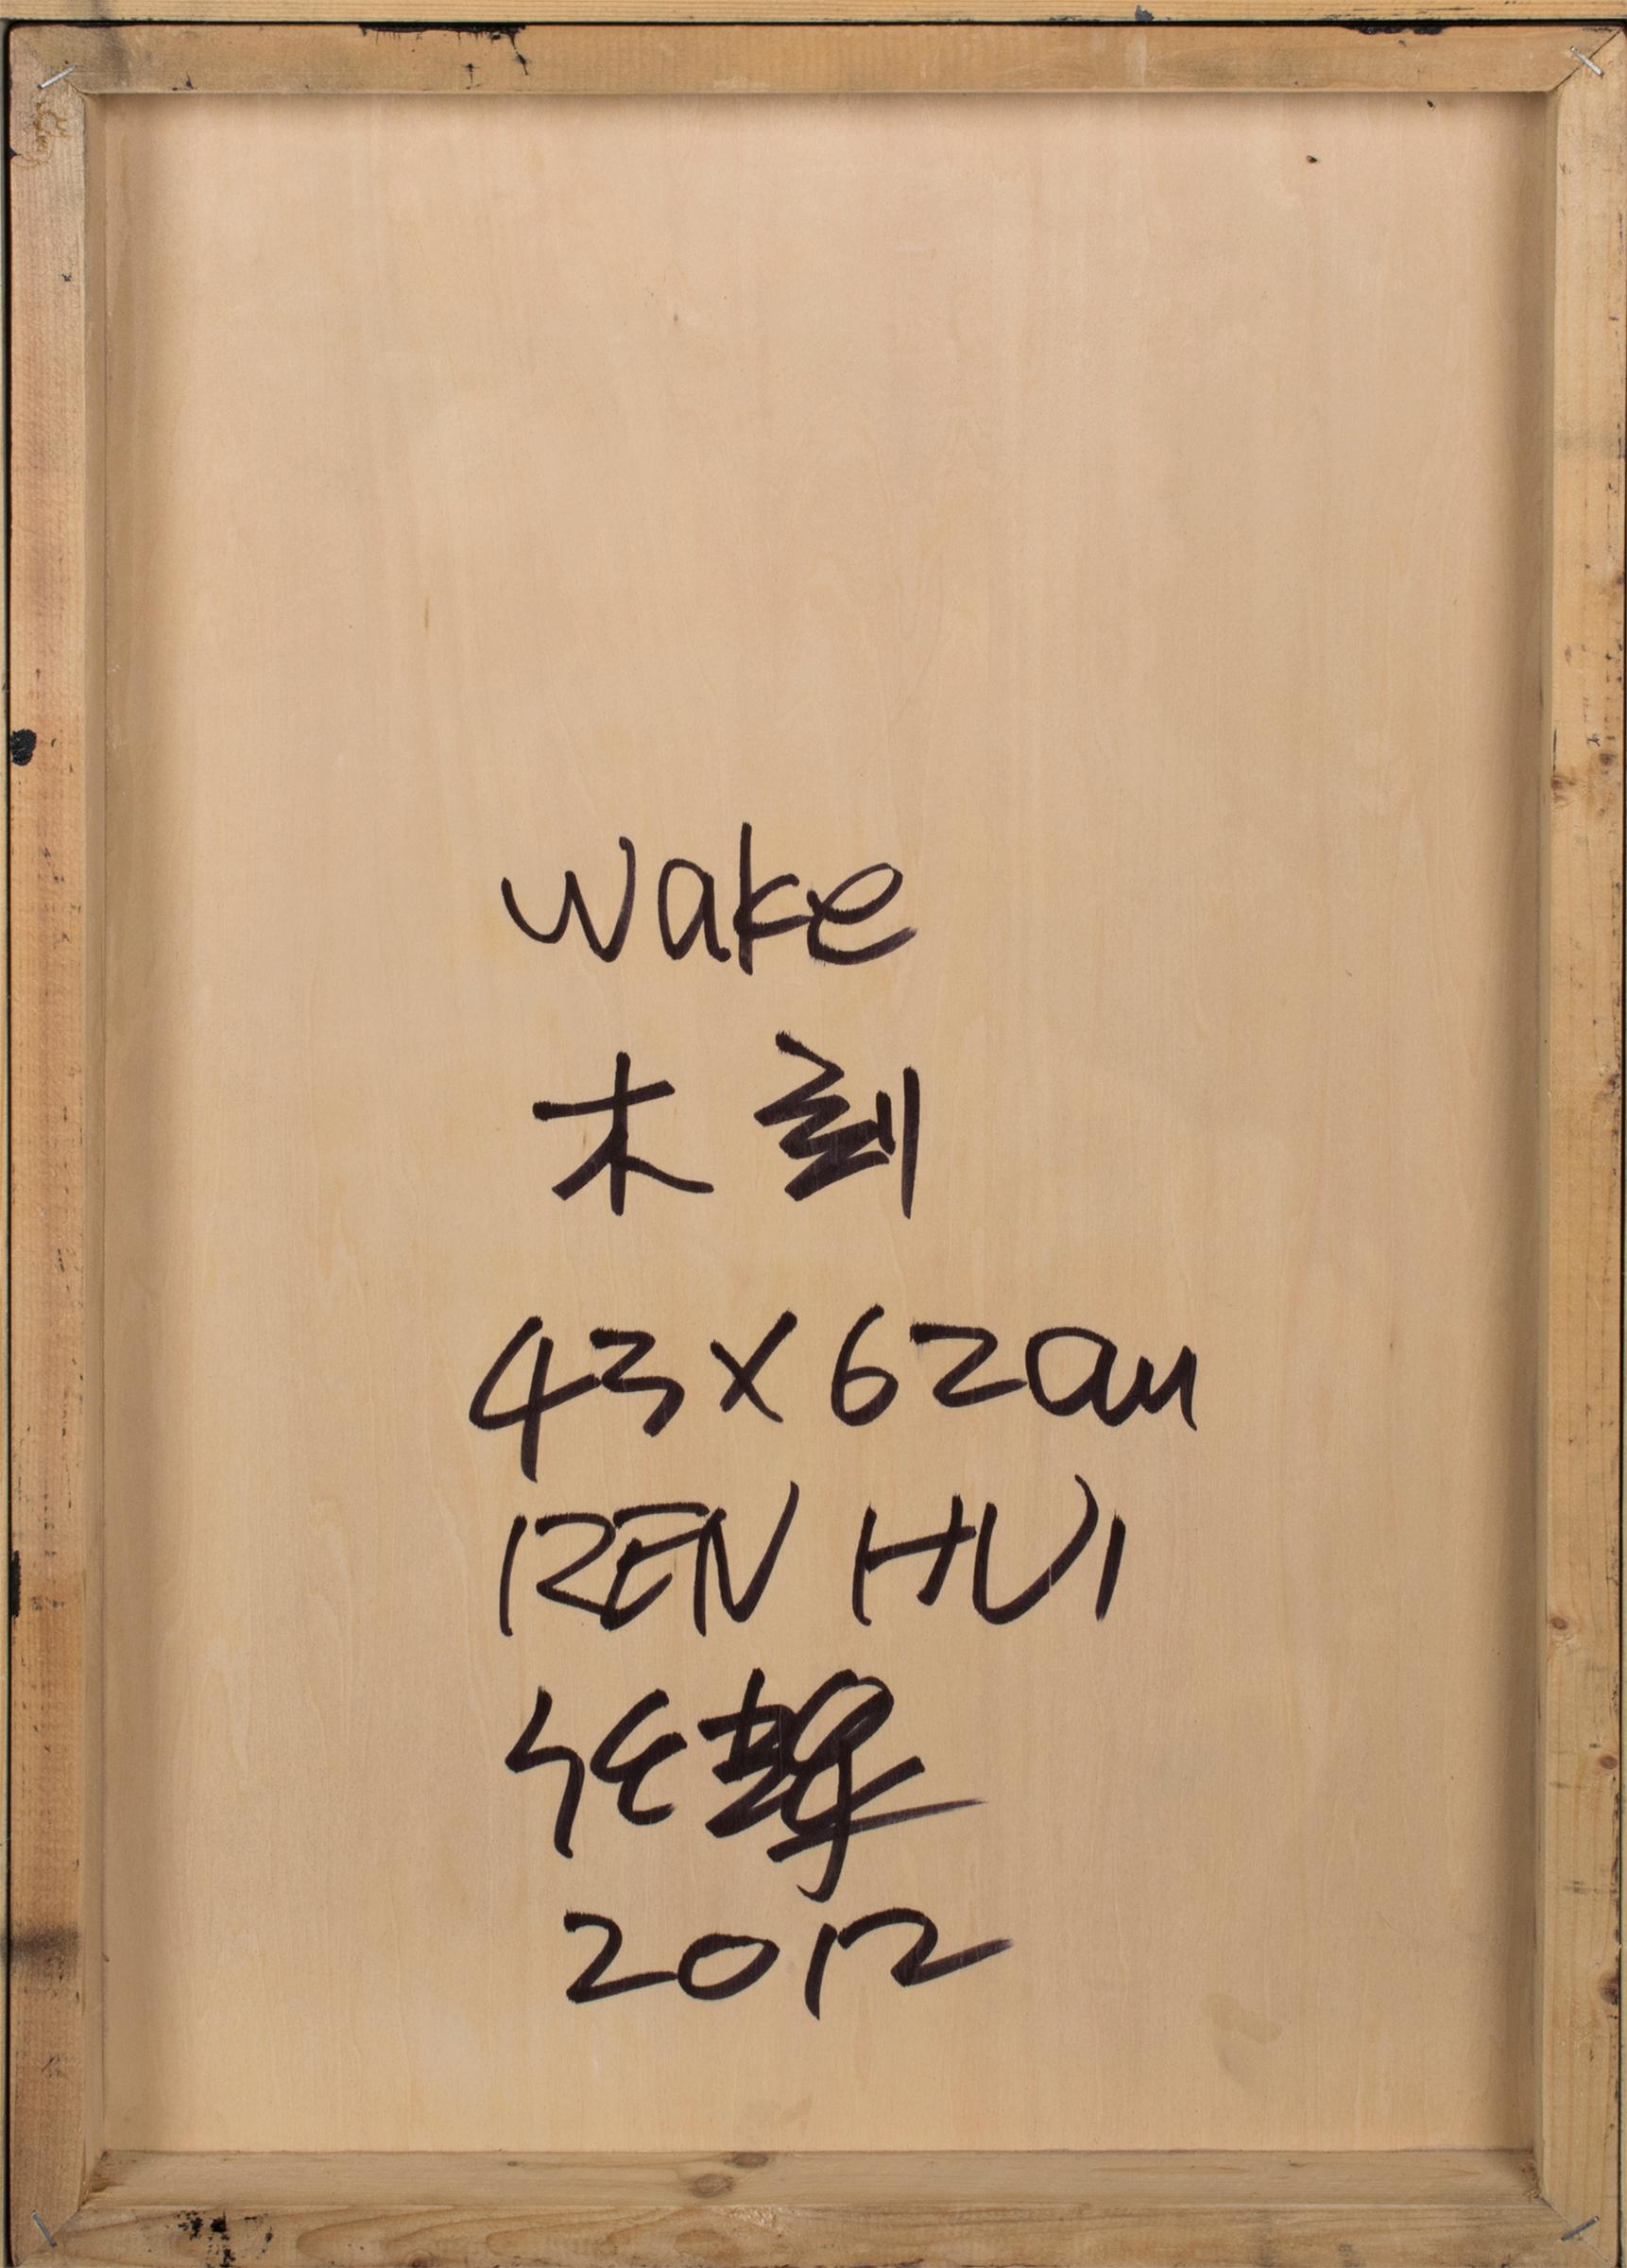 Etched 'Wake' by Ren Hui